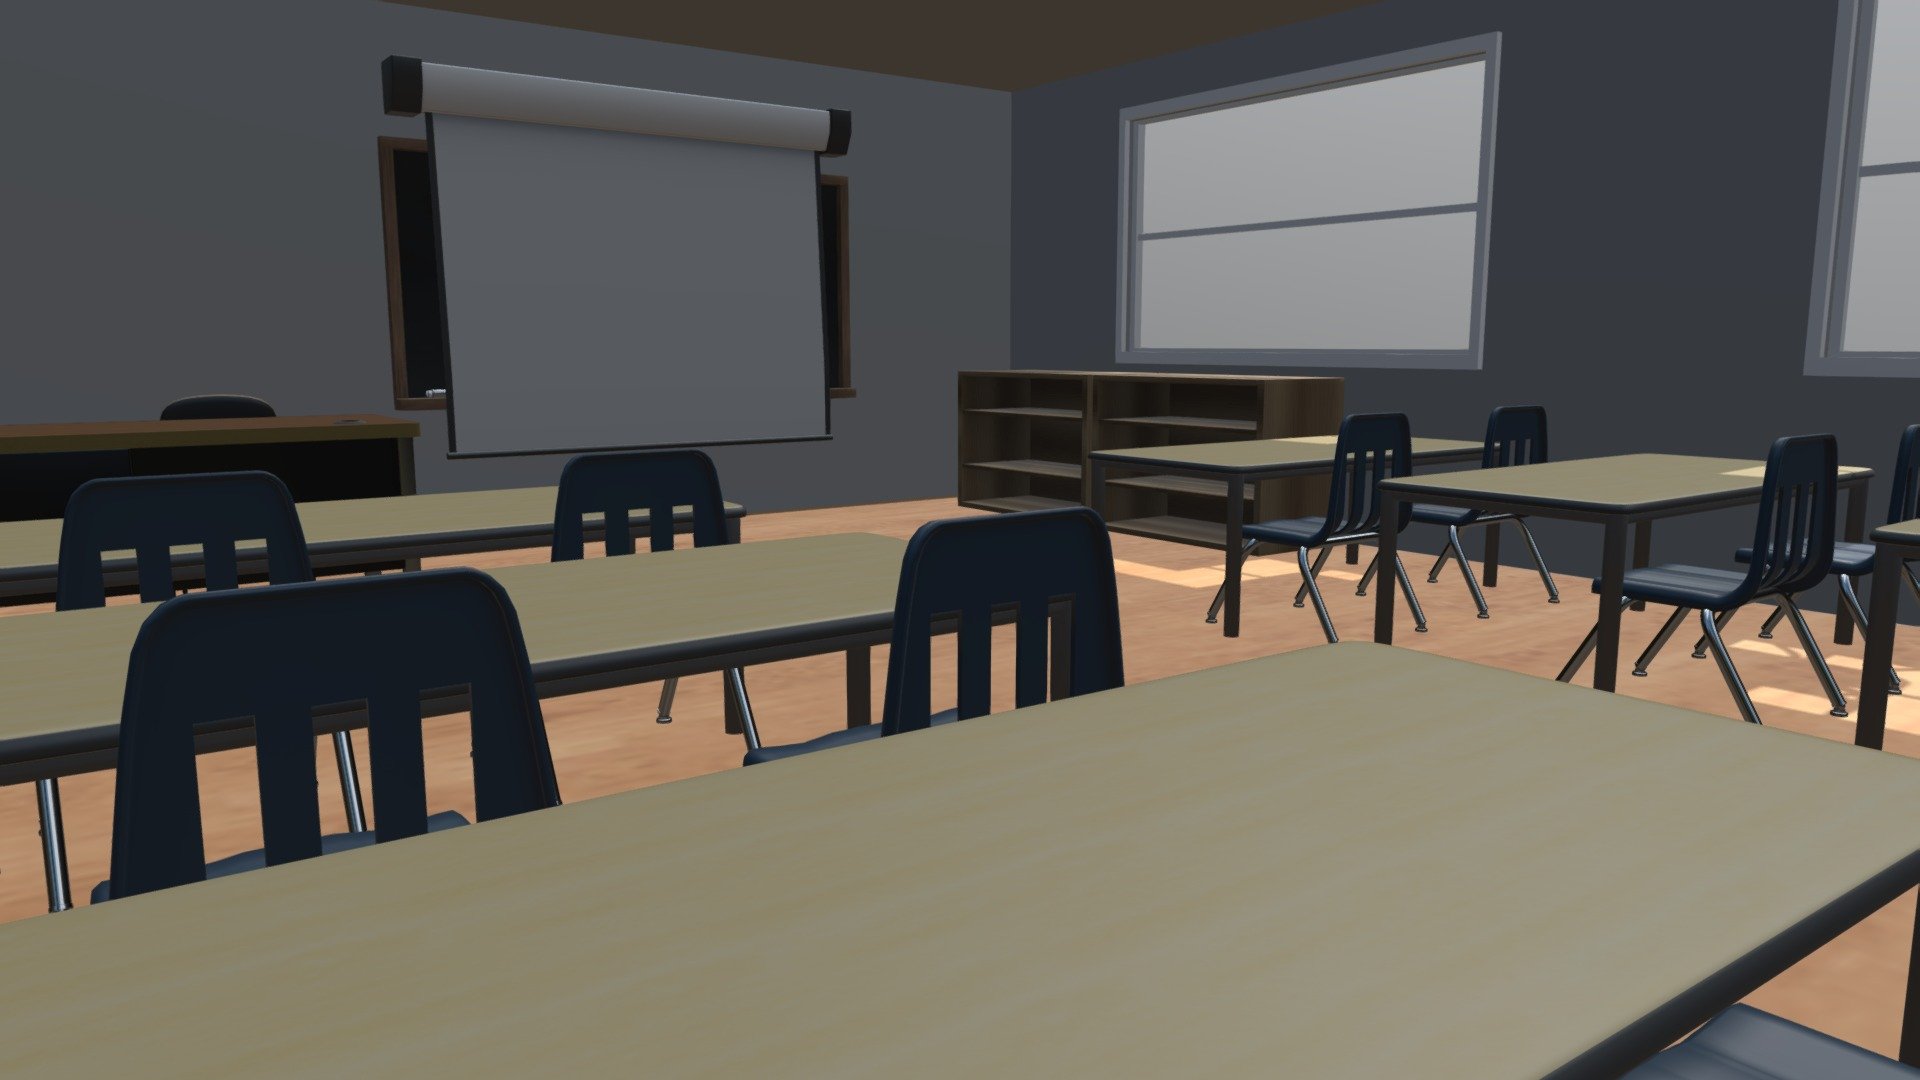 This is a test scene which uses assets from my &ldquo;School Classroom Asset Pack